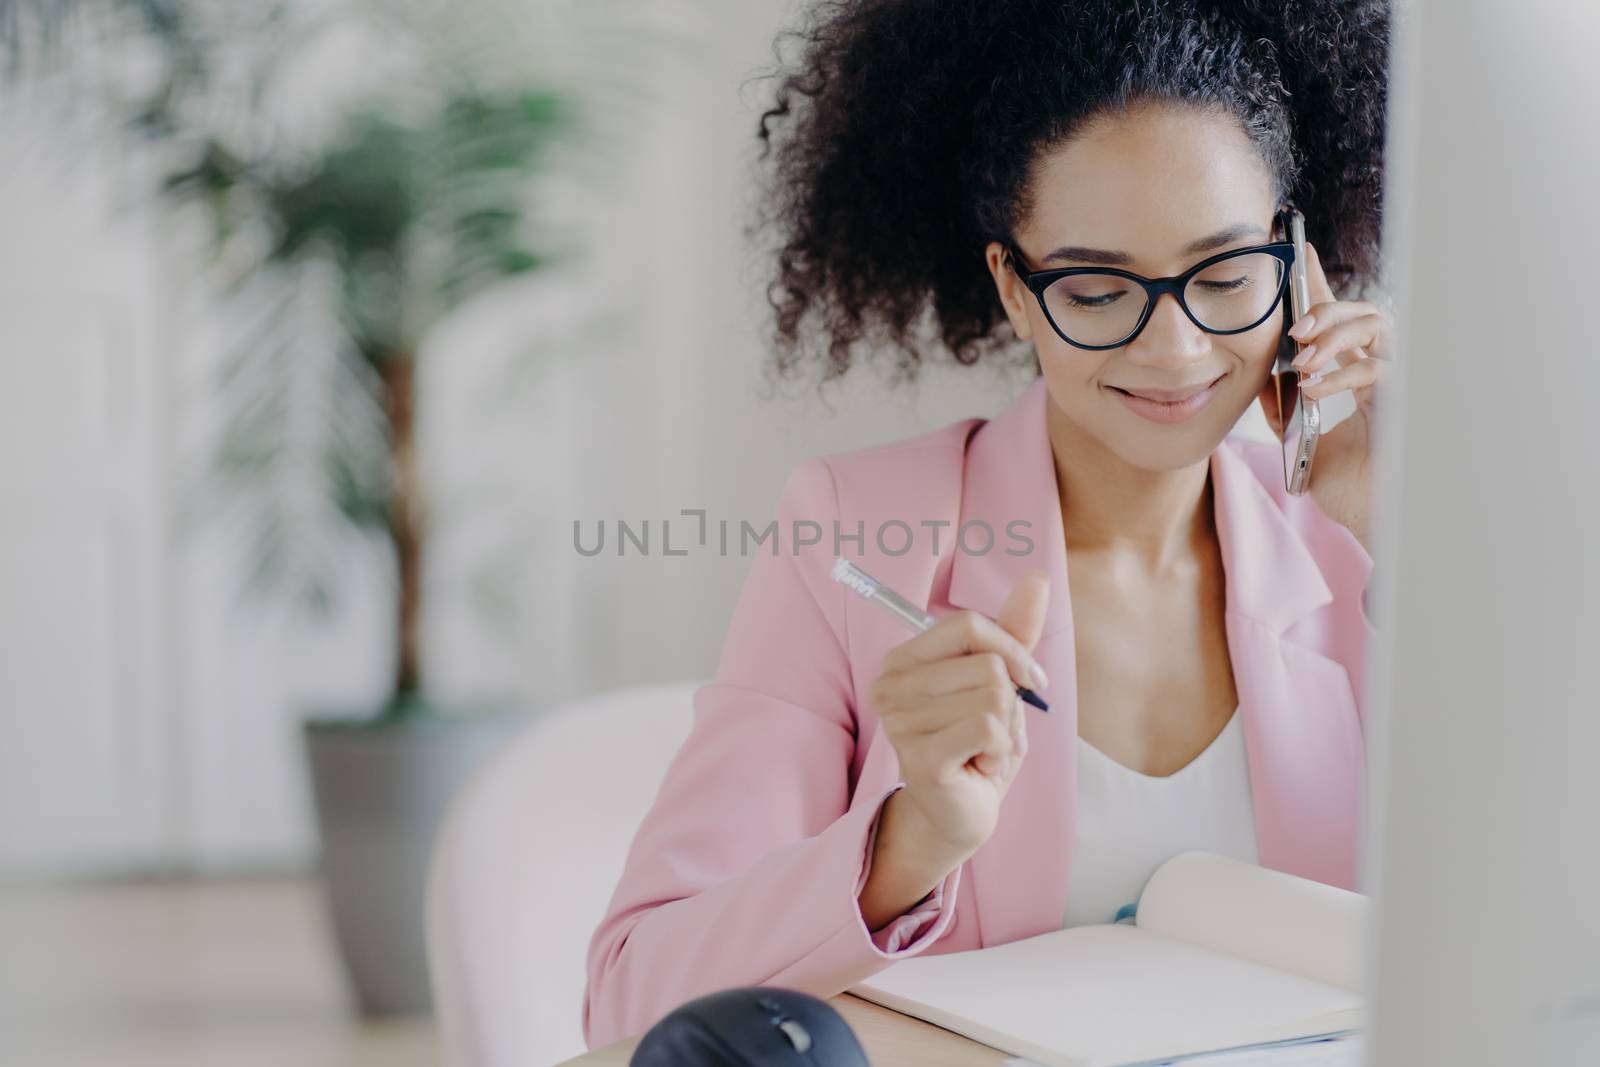 Smiling charming woman with curly hair, writes down information in notebook, gets consultancy via cellphone, wears glasses and elegant suit, busy working, owns business company, solves problems by vkstock